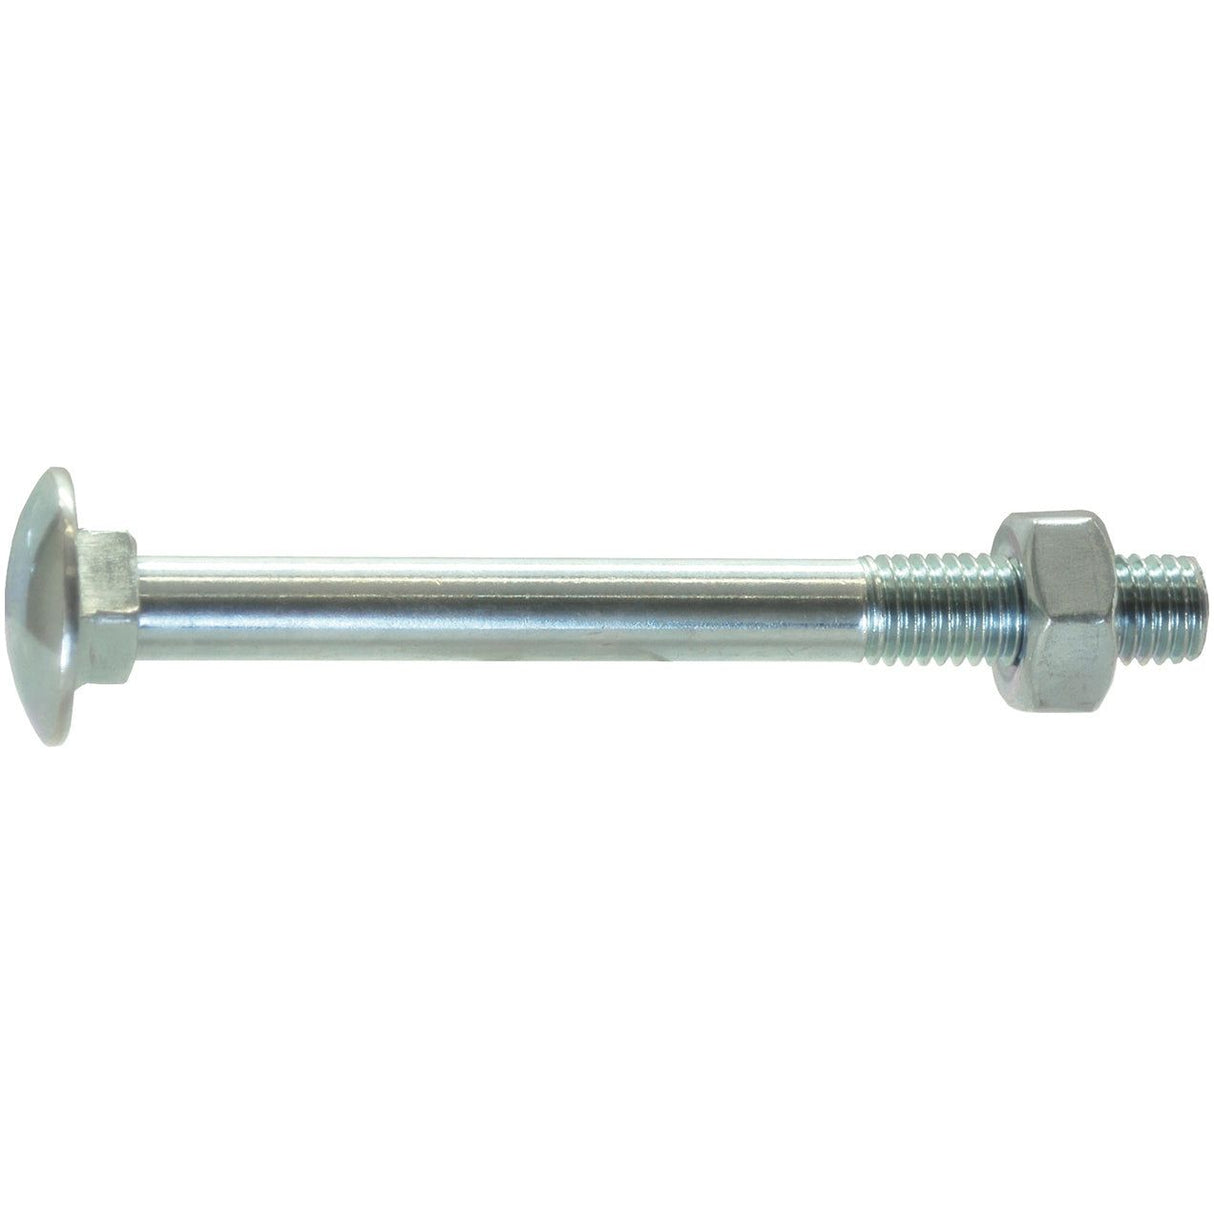 Metric Carriage Bolt and Nut, Size: M12 x 75mm (Din 603/555)
 - S.8303 - Massey Tractor Parts